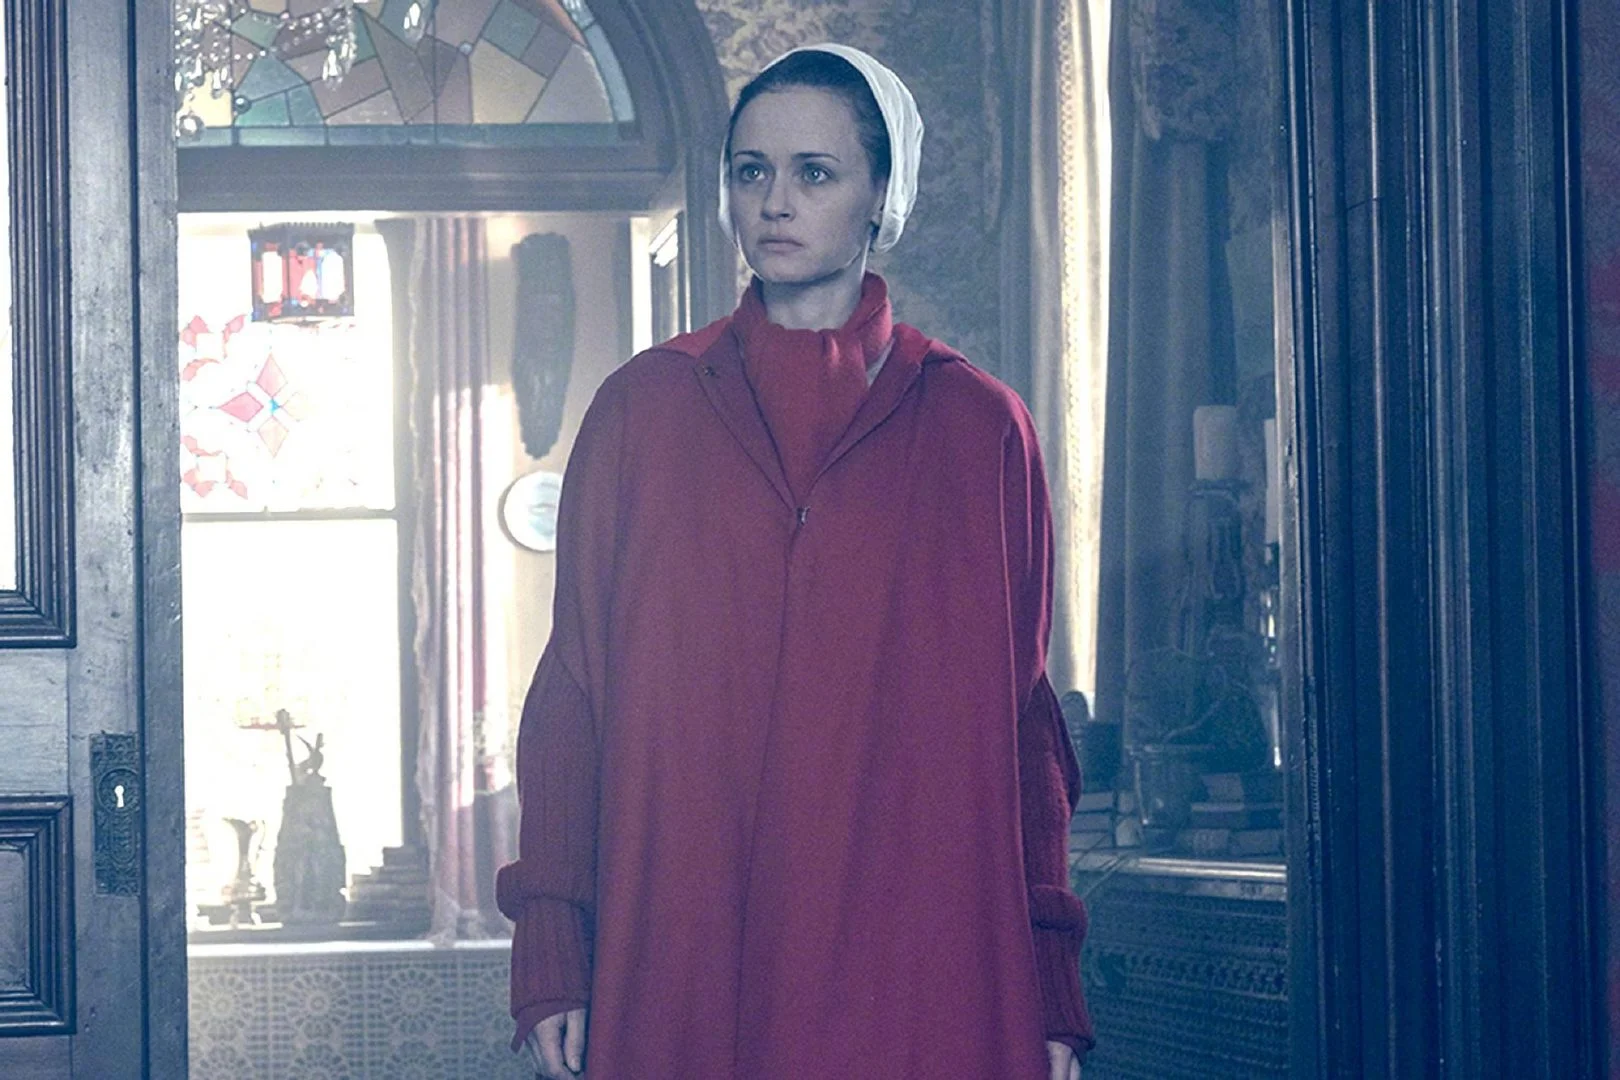 Alexis Bledel Announces Exit from "The Handmaid's Tale"